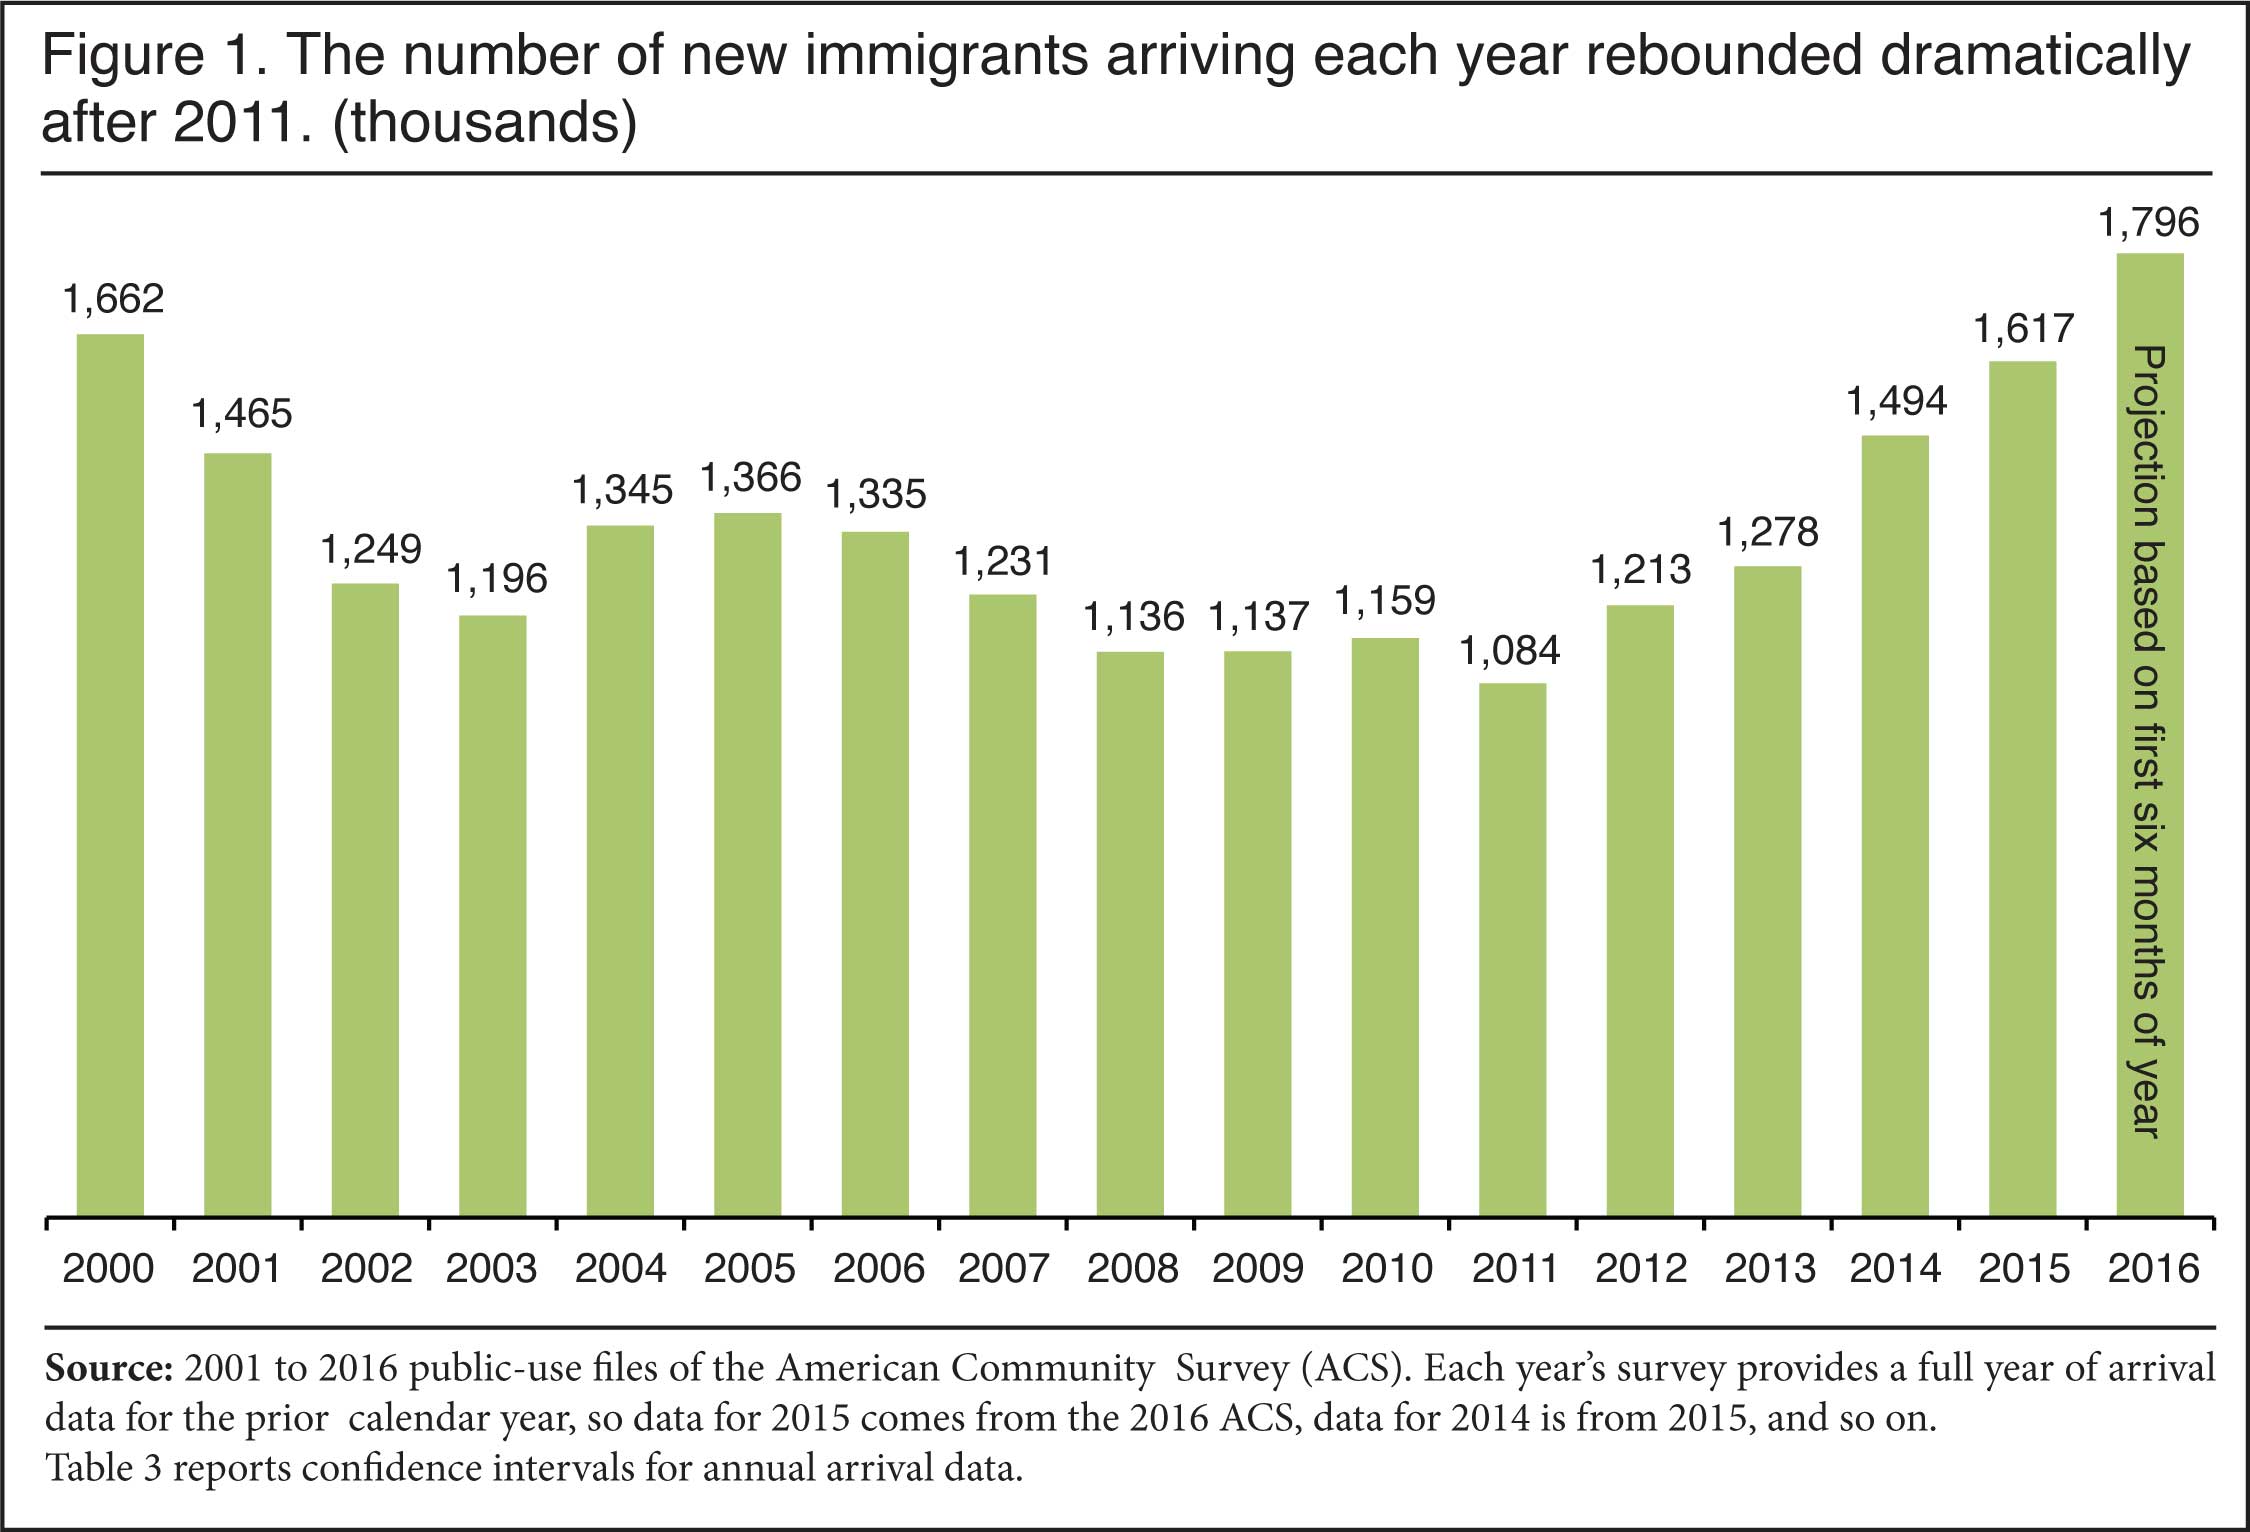 The number of new immigrants arriving each year rebounded dramatically after 2011